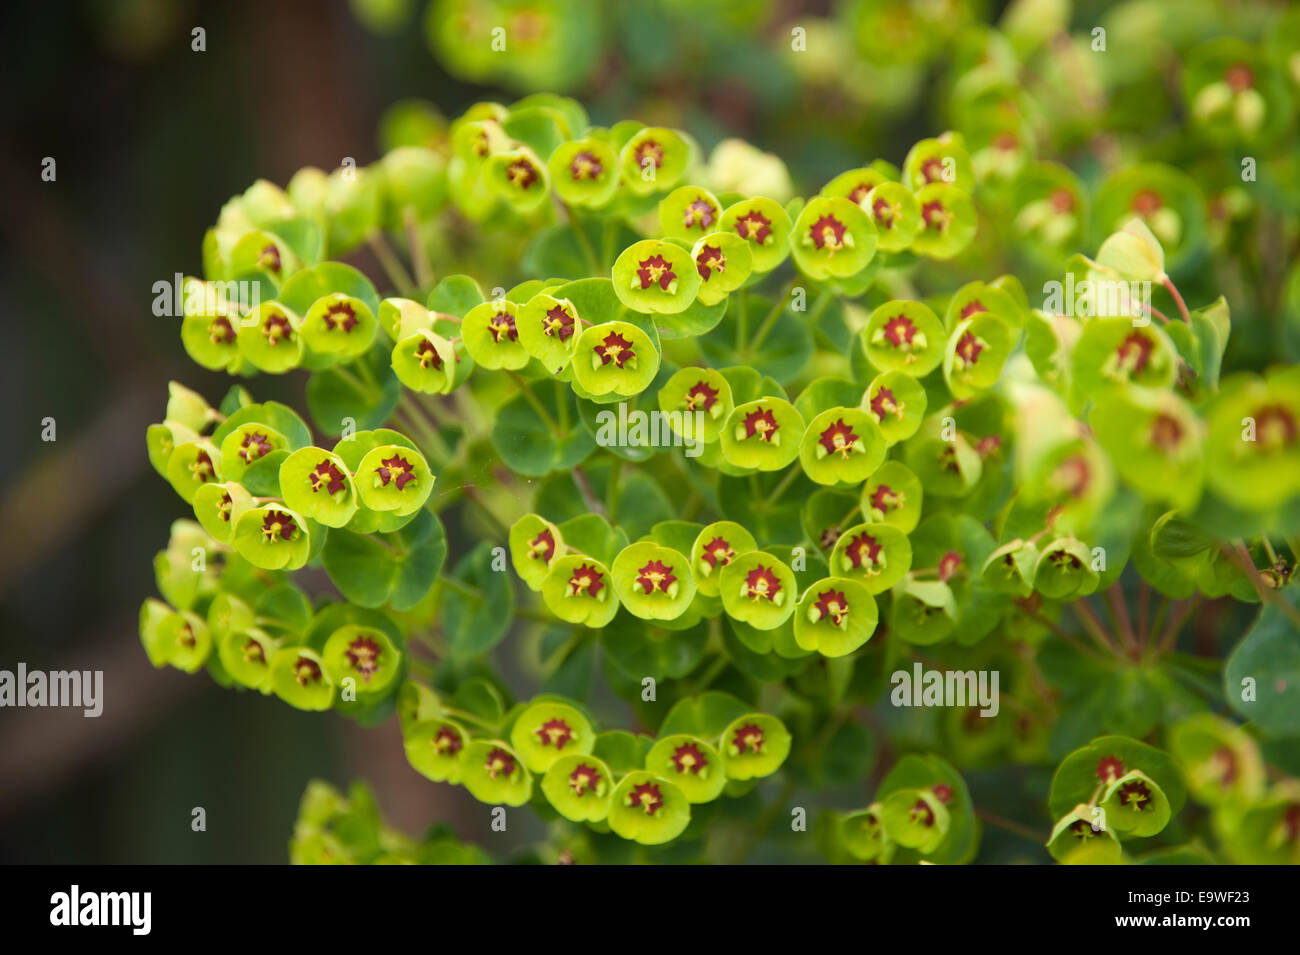 Close up of Euphorbia Martinii flower commonly known as Martin's Spurge Stock Photo